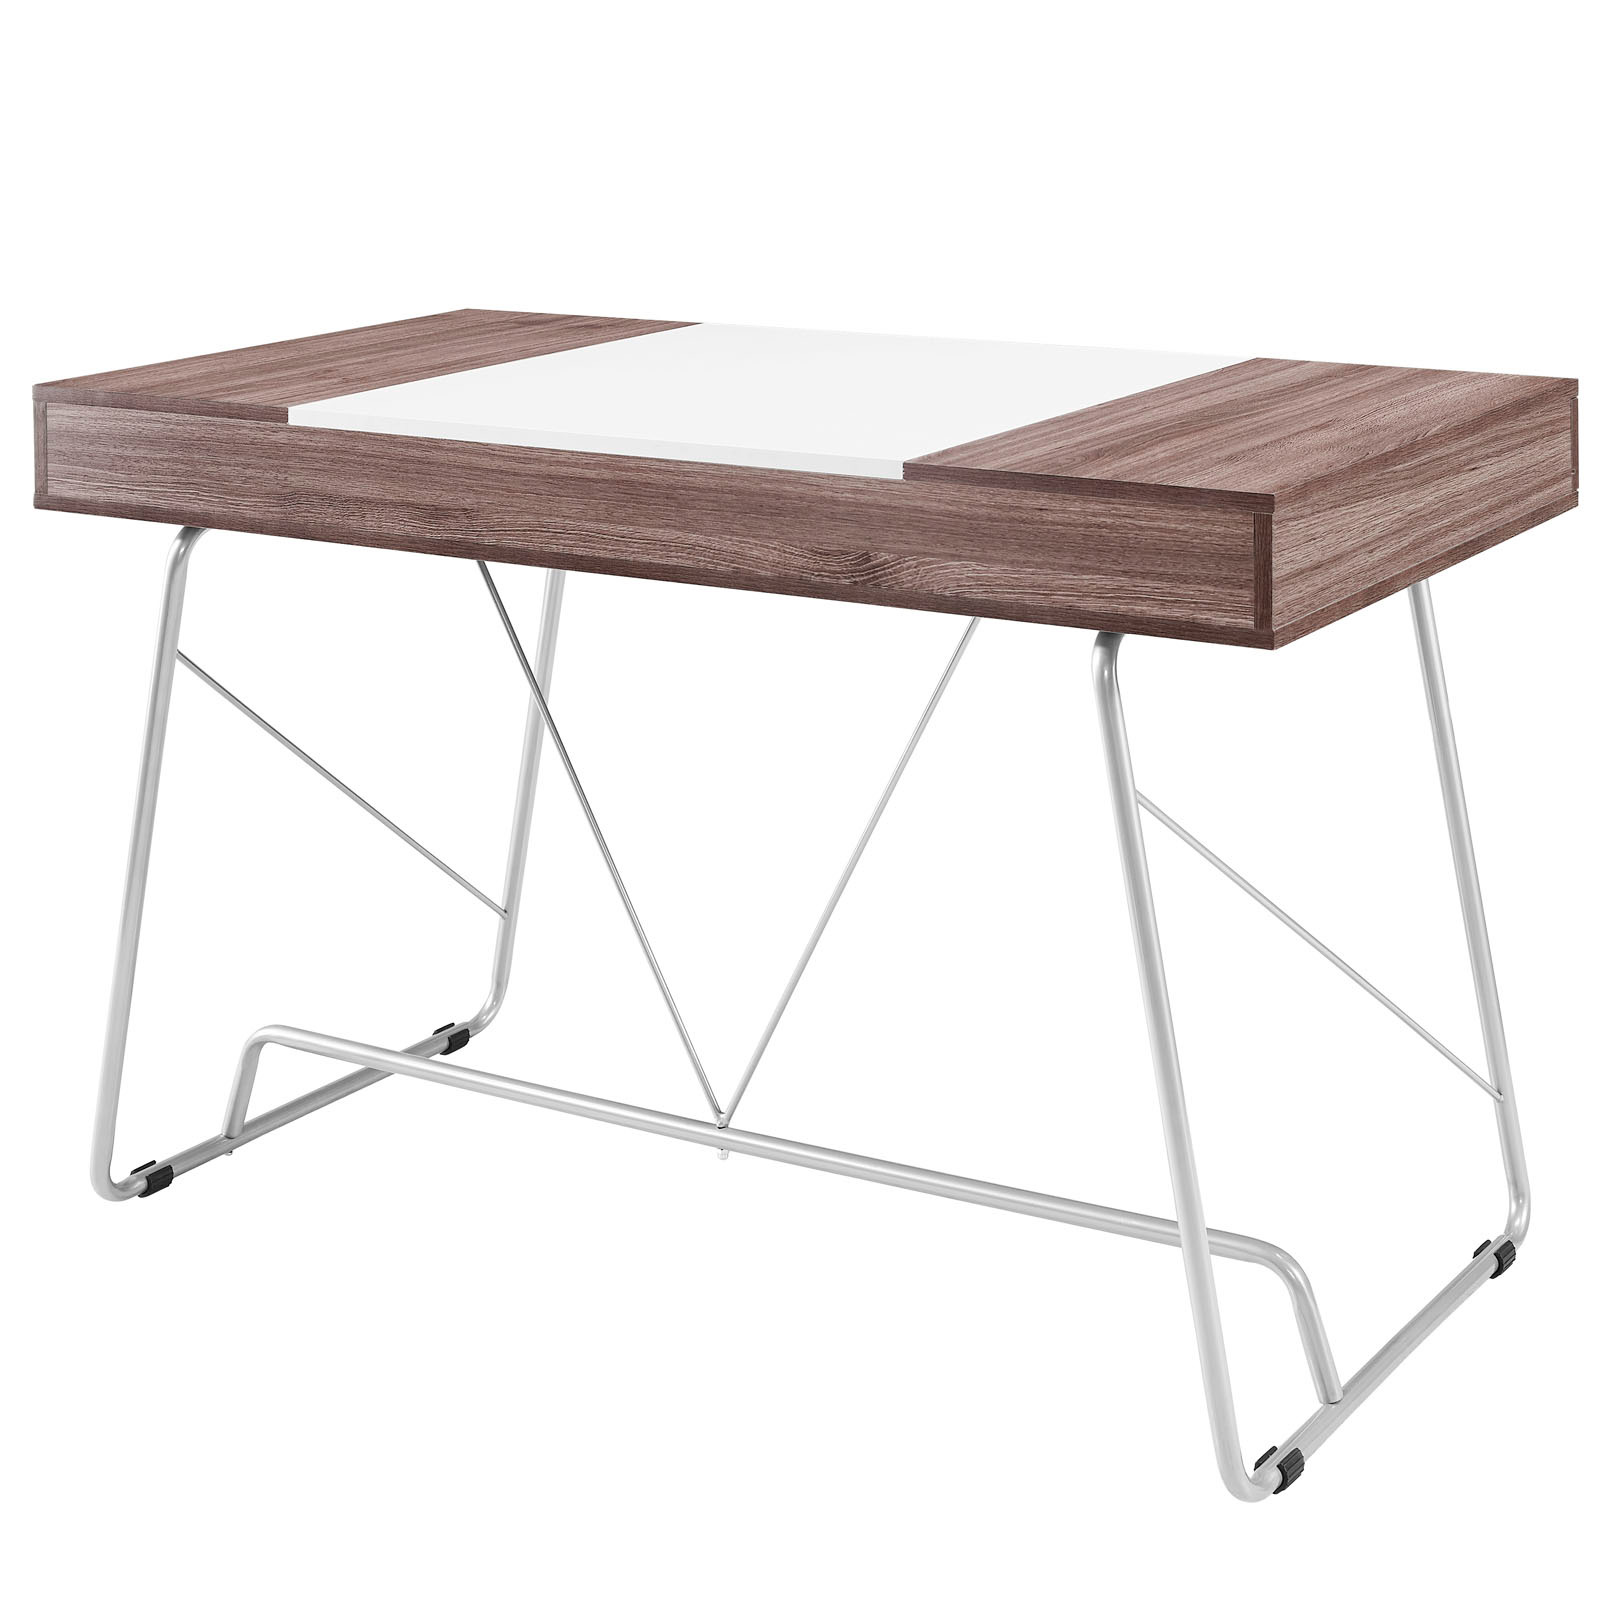 Space saving desk from Modway - Back View - Shown in Birch (Brown)